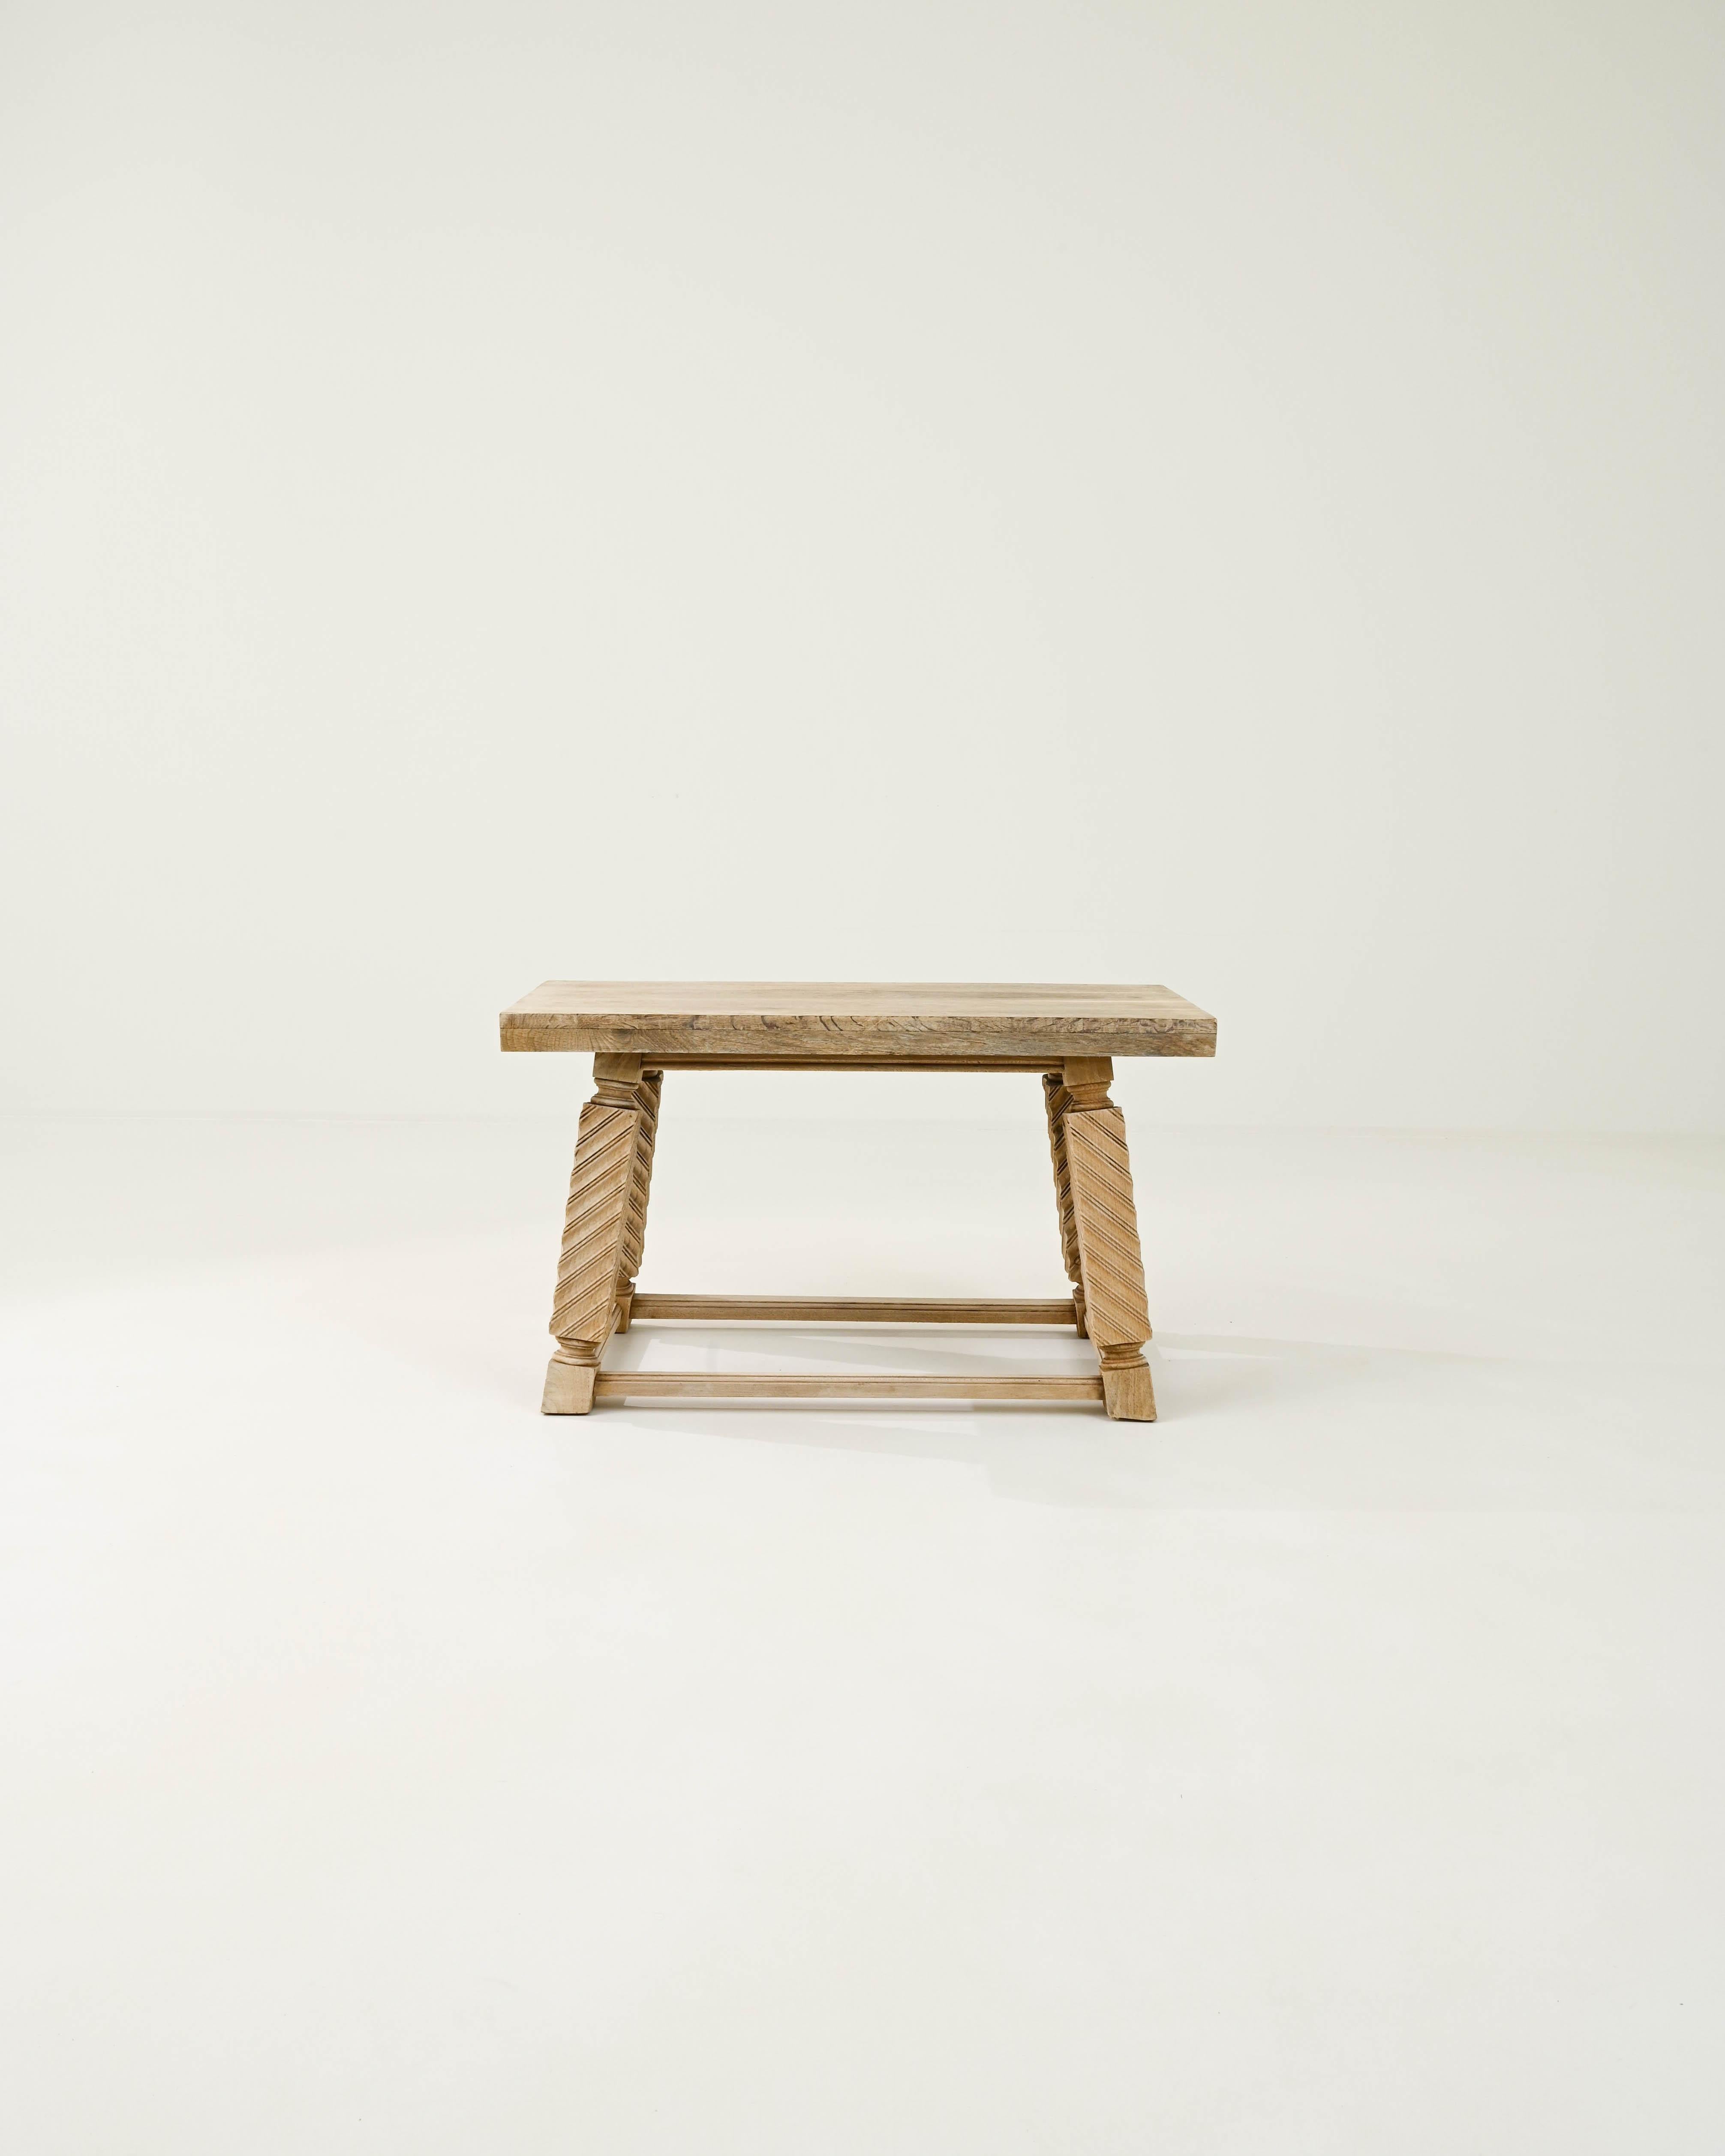 A coffee table made from oak and beech wood, from 20th century Belgium. This stylish table is composed with a classical sensibility, resting on unique square legs, their blocky form given a visual twist by carved ogees. The simplicity of the table